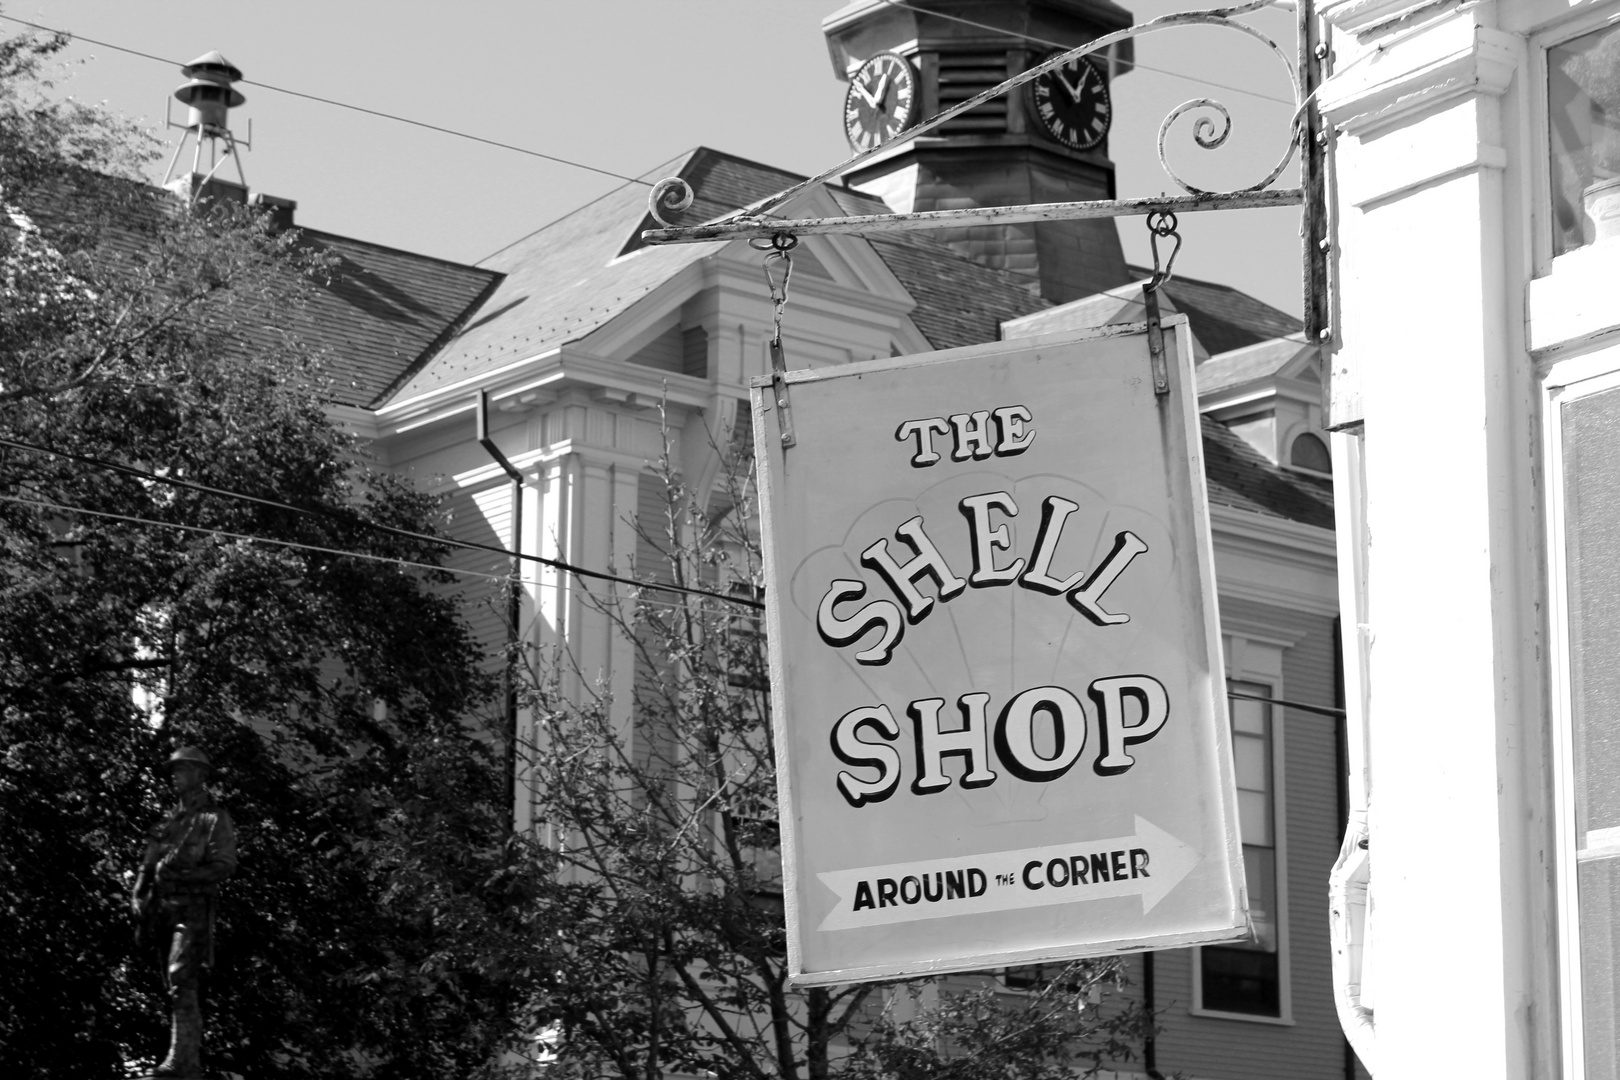 the shell shop !